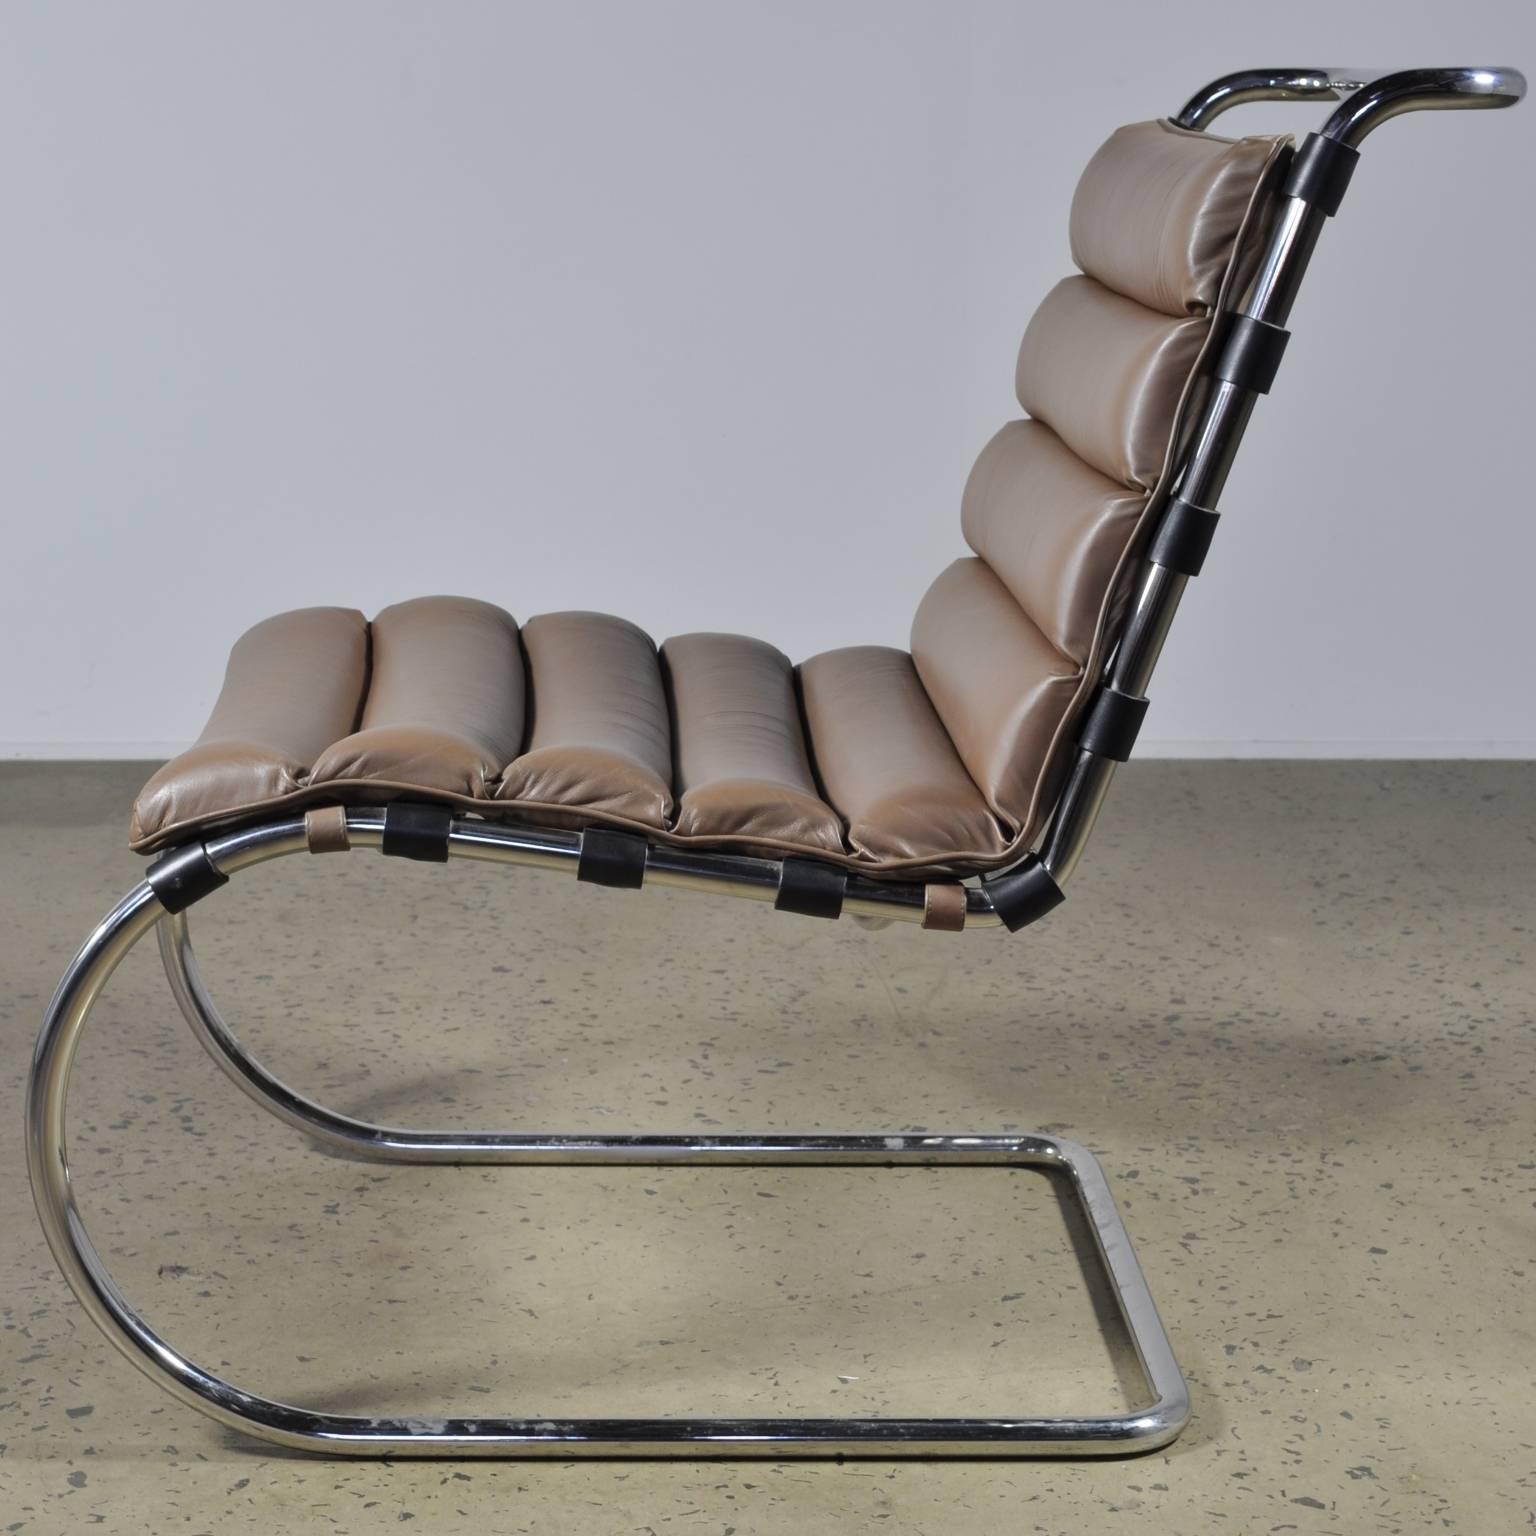 The MR lounge chair, a Classic of early modernism.

Mies van der Rohe’s MR lounge armchair was designed in 1927 as part of his contribution to the Weissenhof exhibit in Stuttgart, Germany. The cantilevered tubular steel frame and wide proportioned